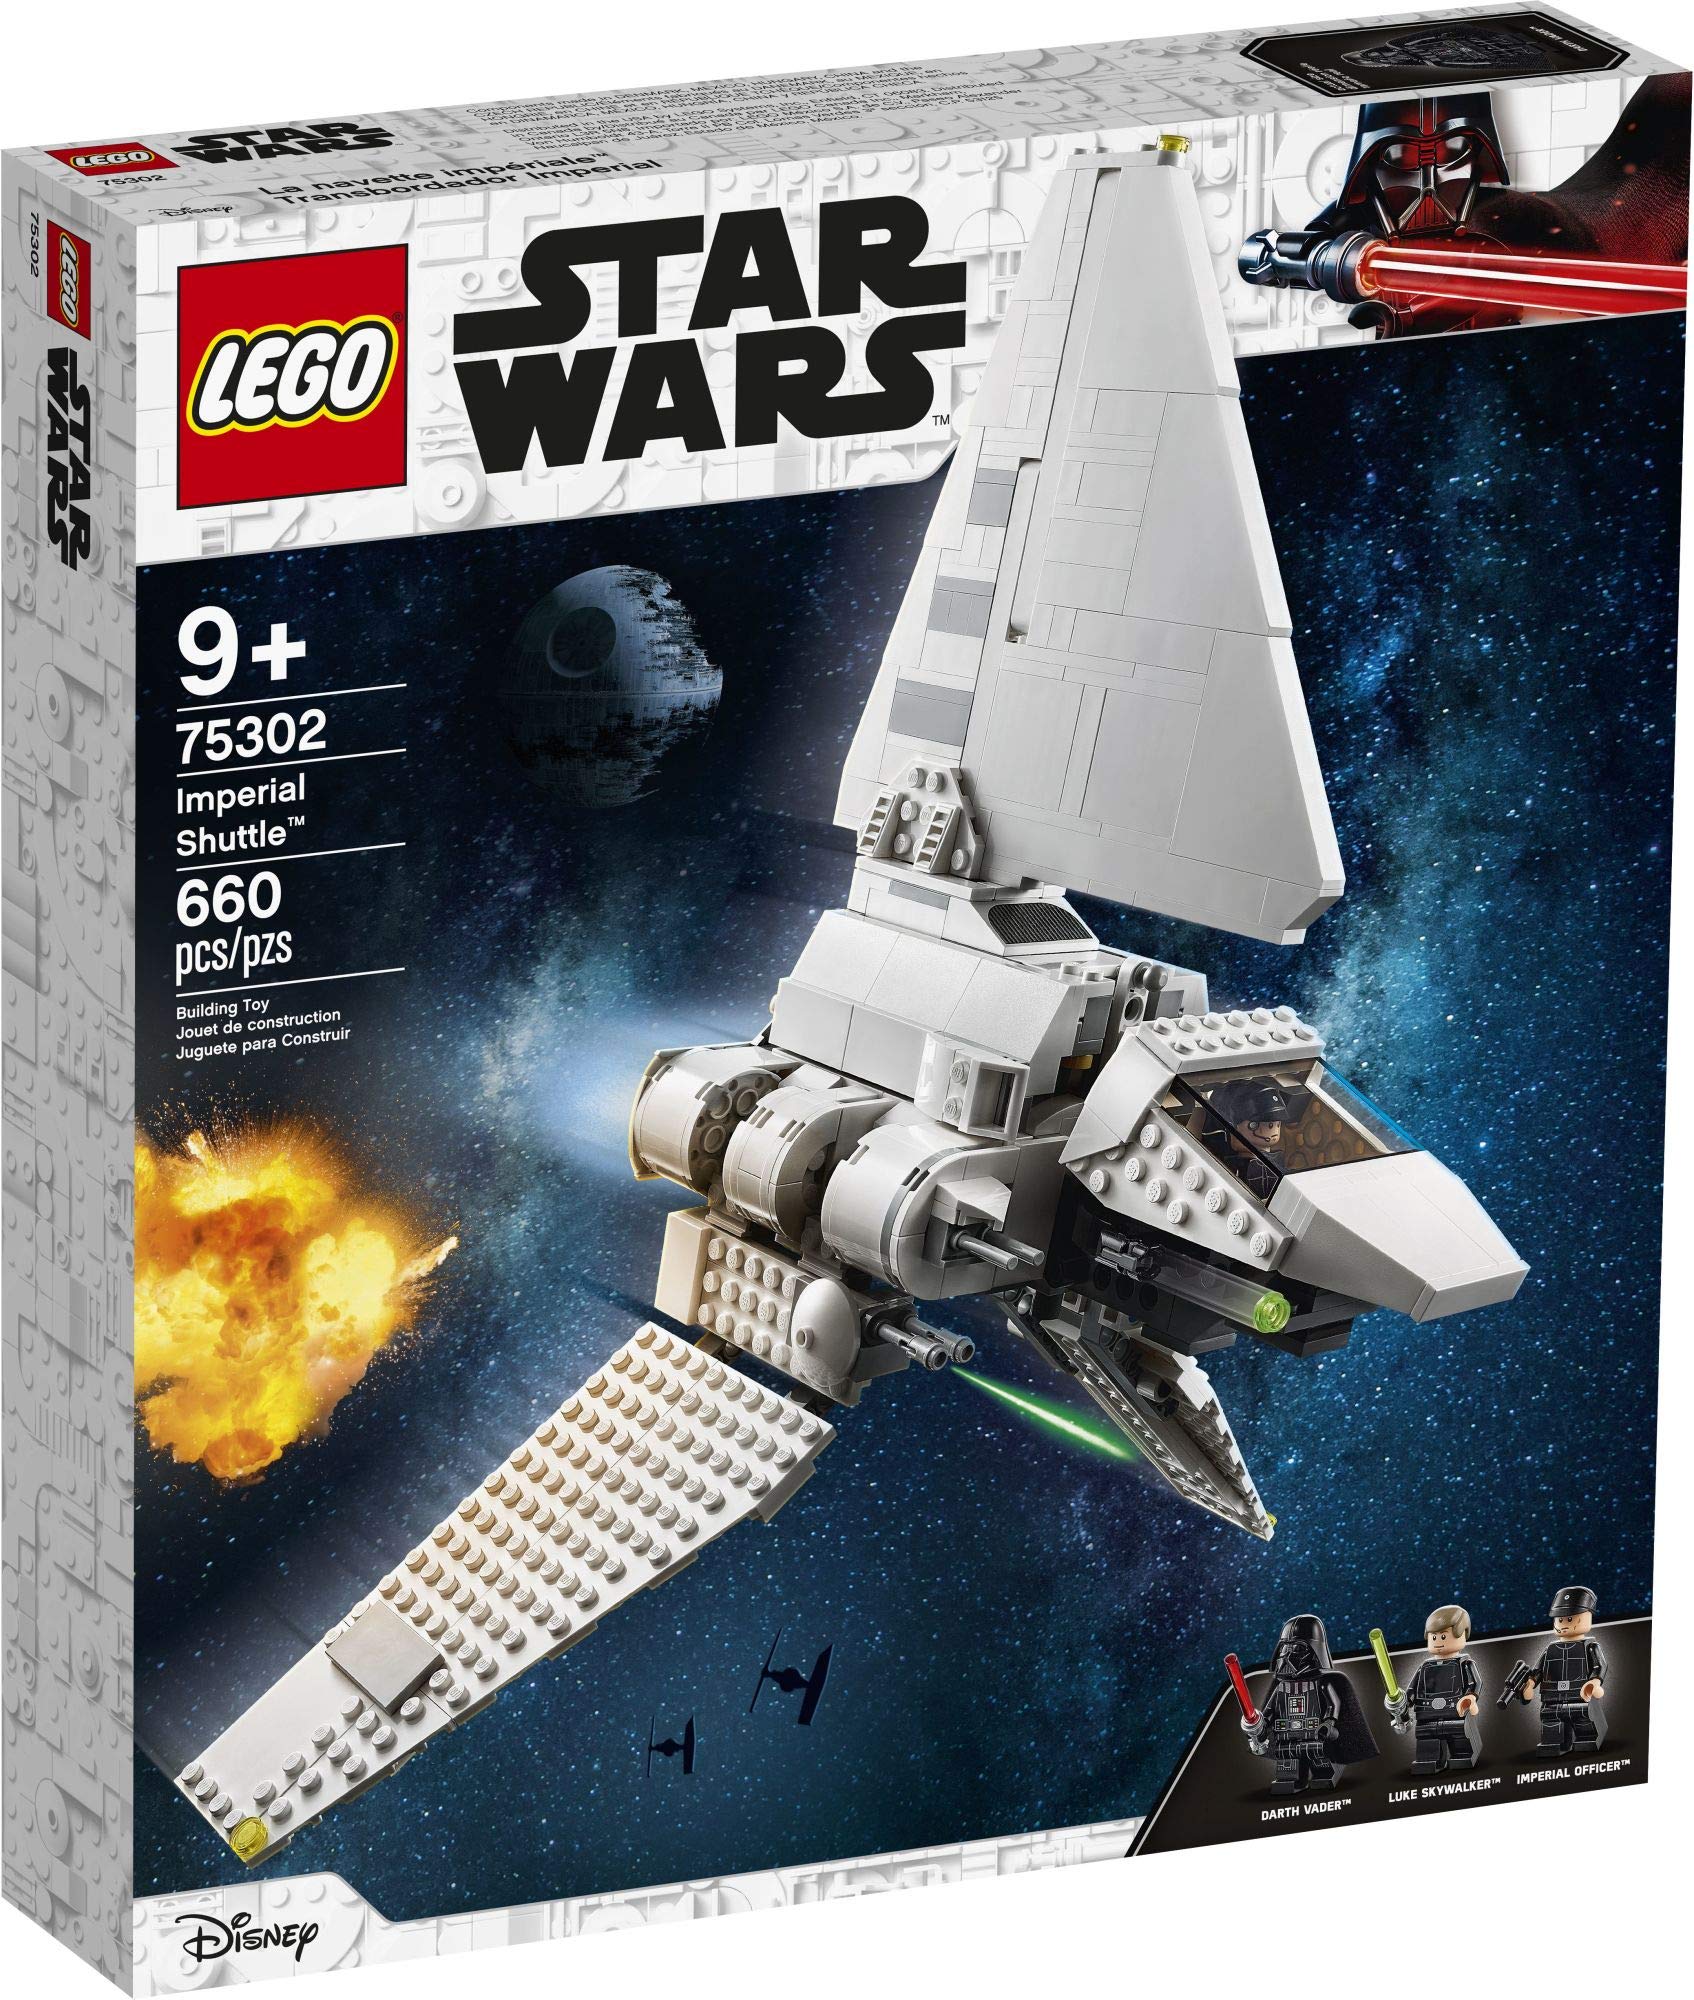 LEGO Star Wars Imperial Shuttle 75302 Building Kit; Awesome Building Toy for Kids Featuring Luke Skywalker and Darth Vader; Great Gift Idea for Star Wars Fans Aged 9 and Up, New 2021 (660 Pieces)